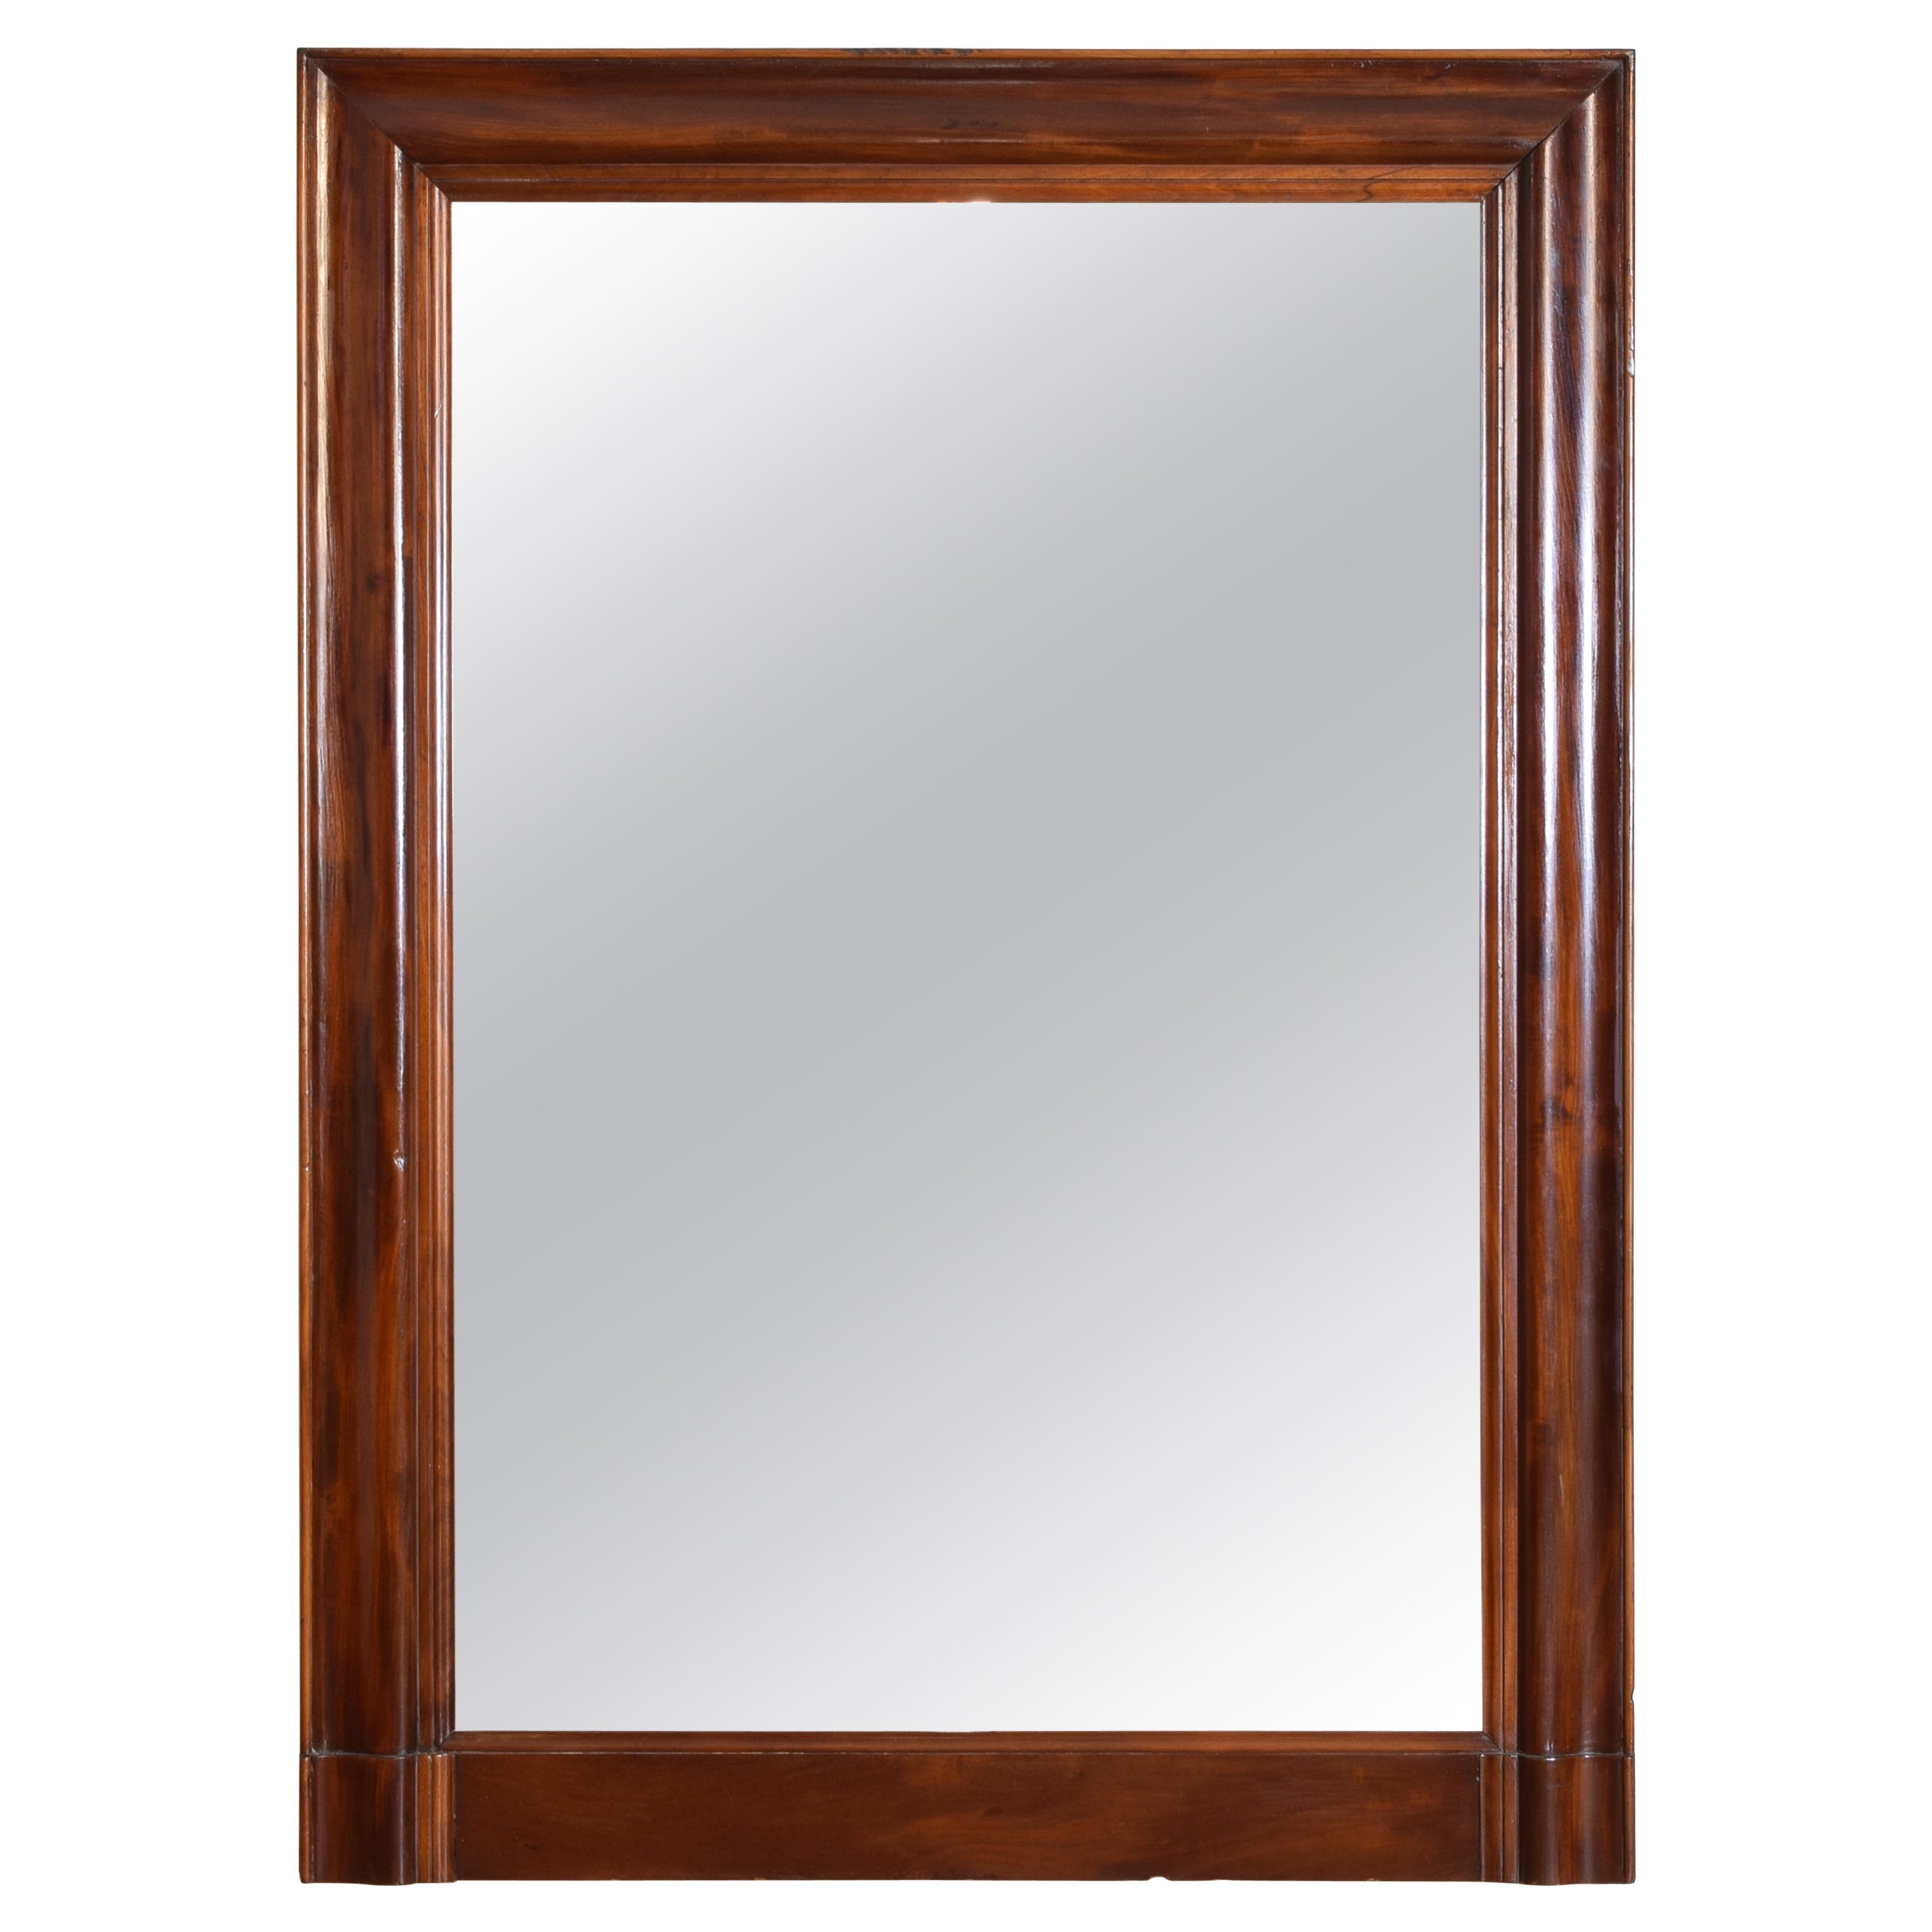 French Louis Philippe Period Shaped Cherrywood Wall Mirror, 2ndq 19th Century